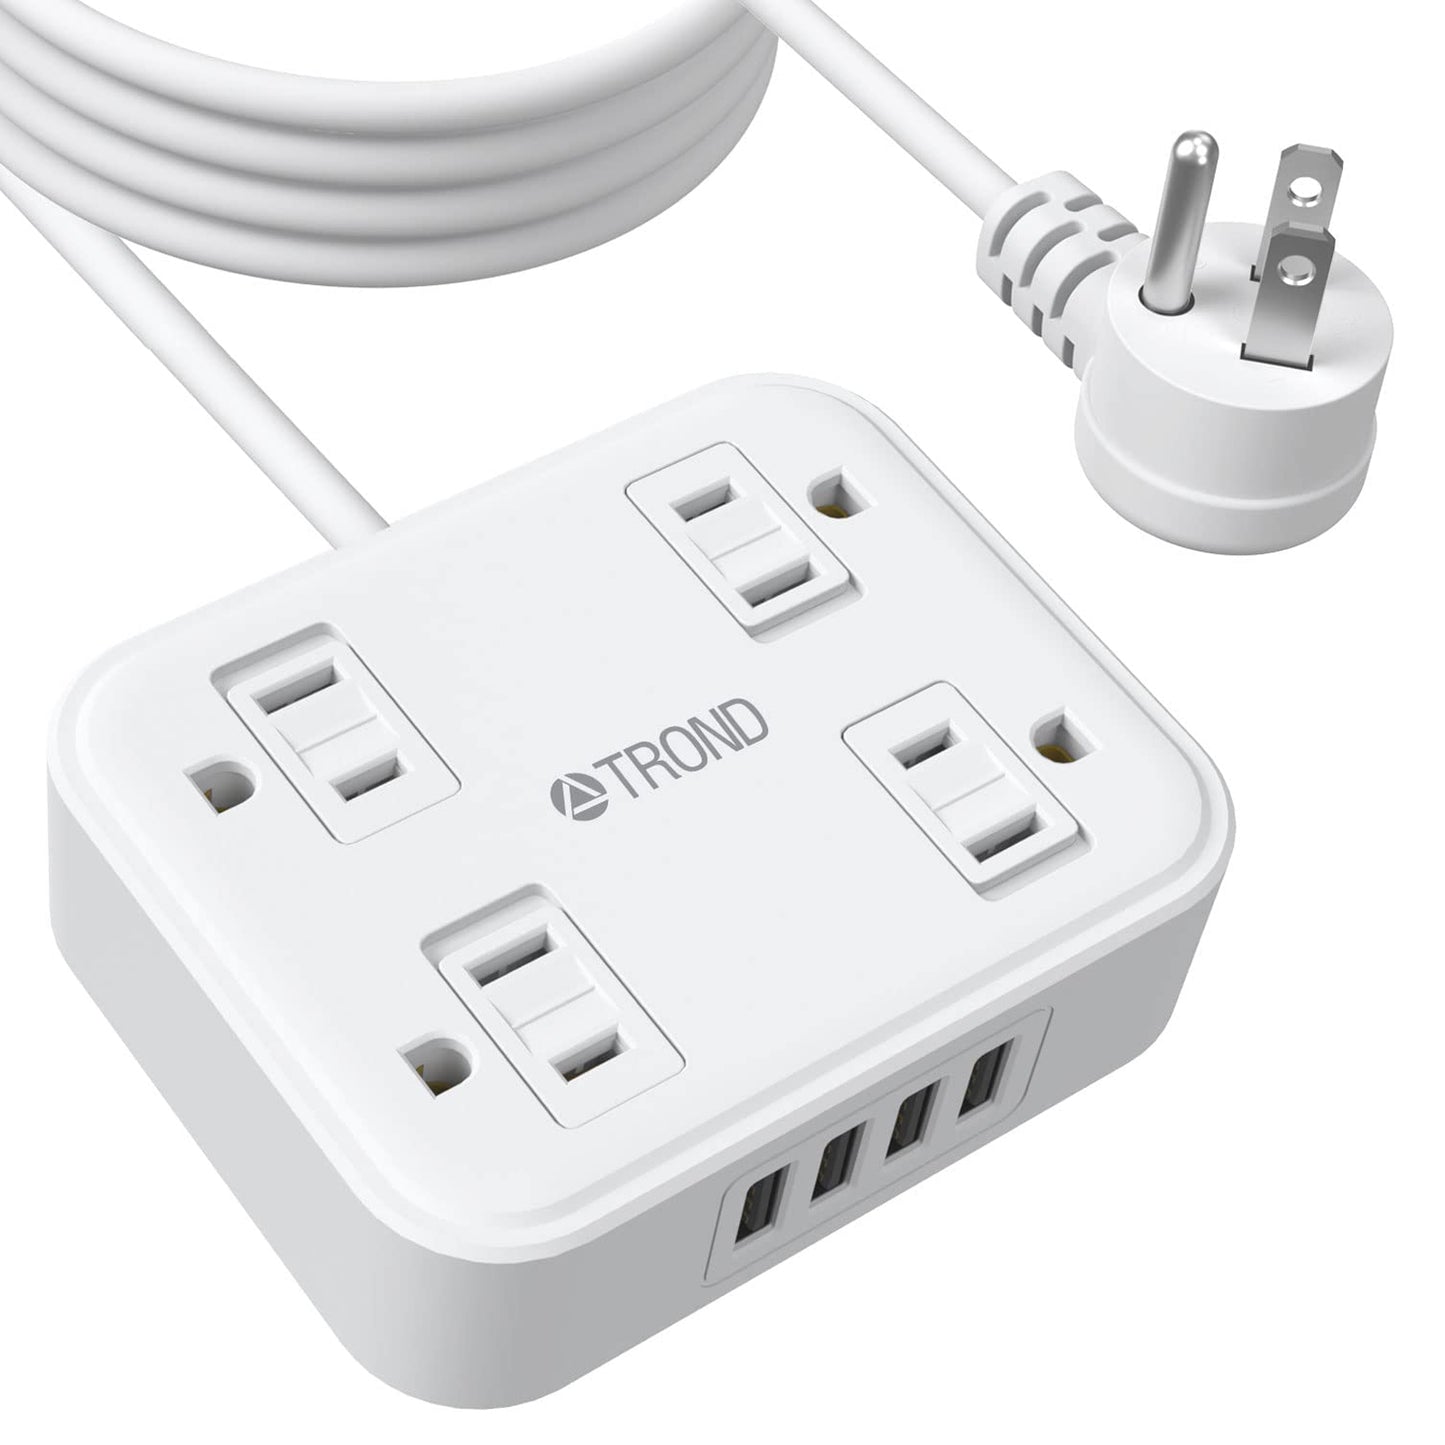 Power Strip Long Cord 10ft - TROND 4 Child Safety AC Outlets, 4 USB Ports